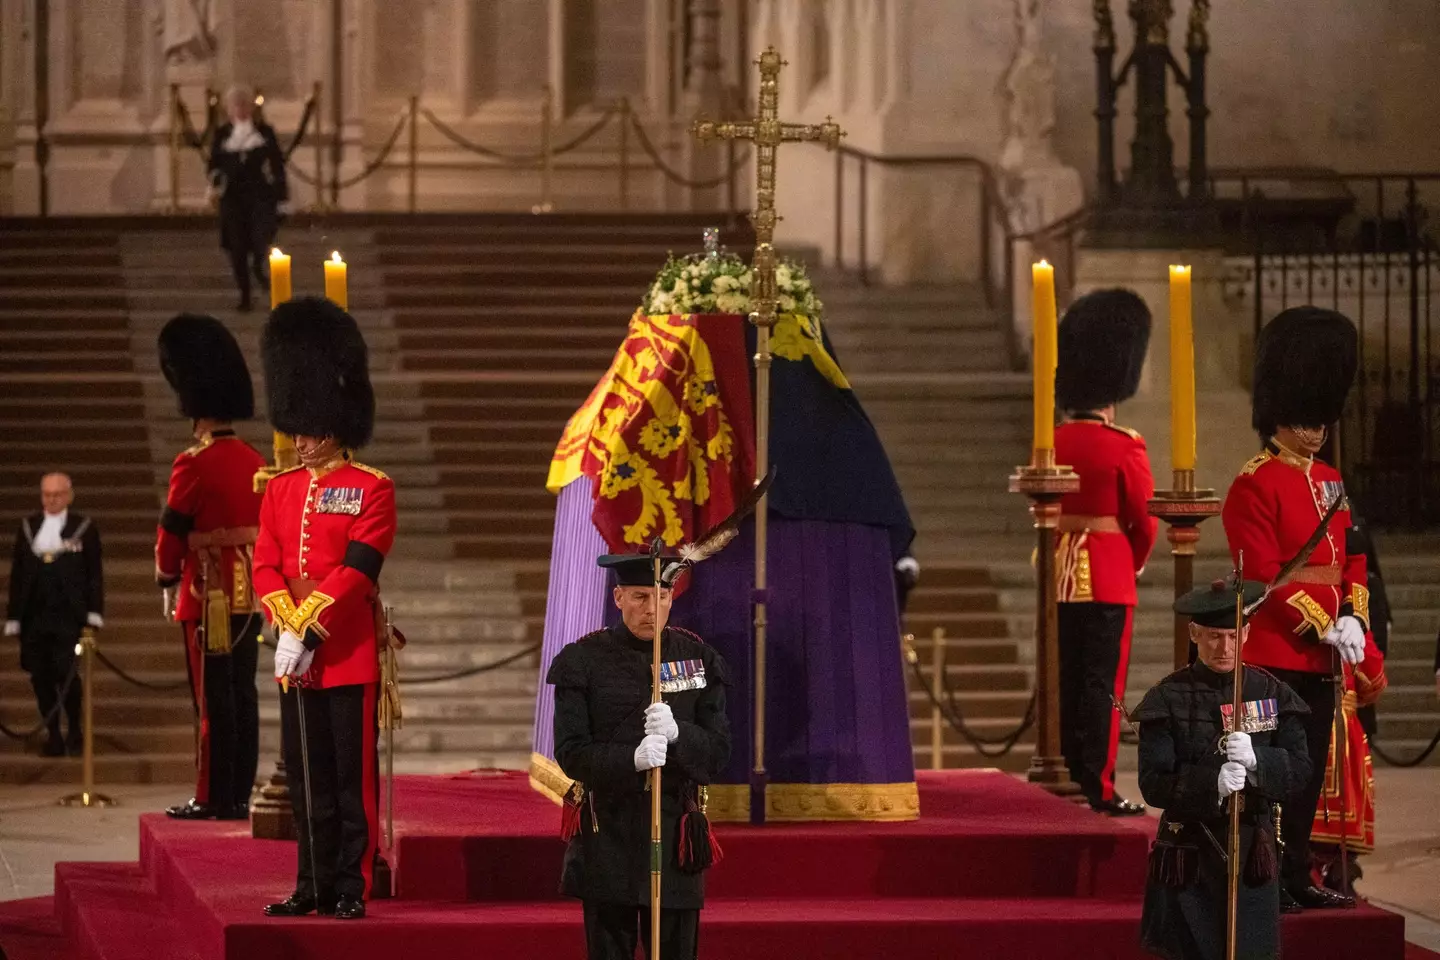 Thousands of people queued to see the Queen's coffin lying-in-state.